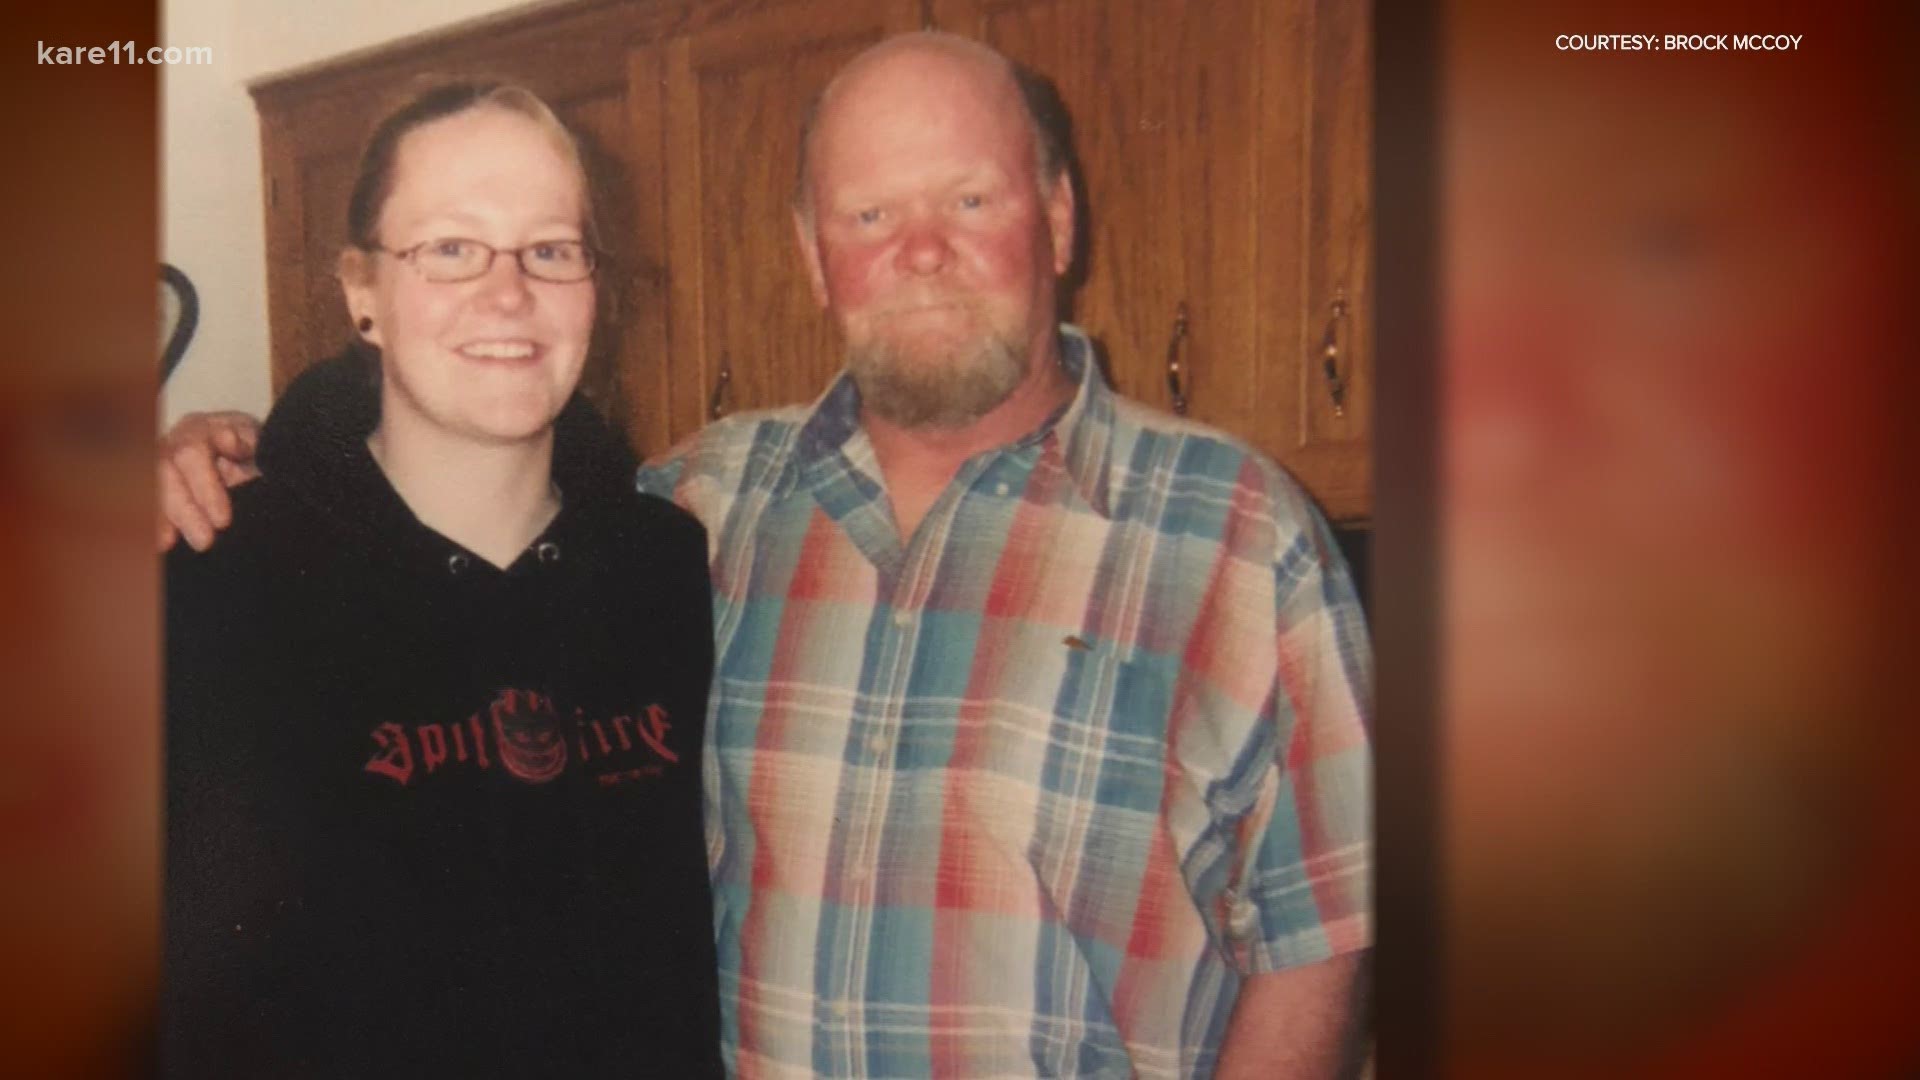 Terry McCoy disappeared June 17 near Wheaton, MN. Someone found a body seven miles away in a river Monday afternoon